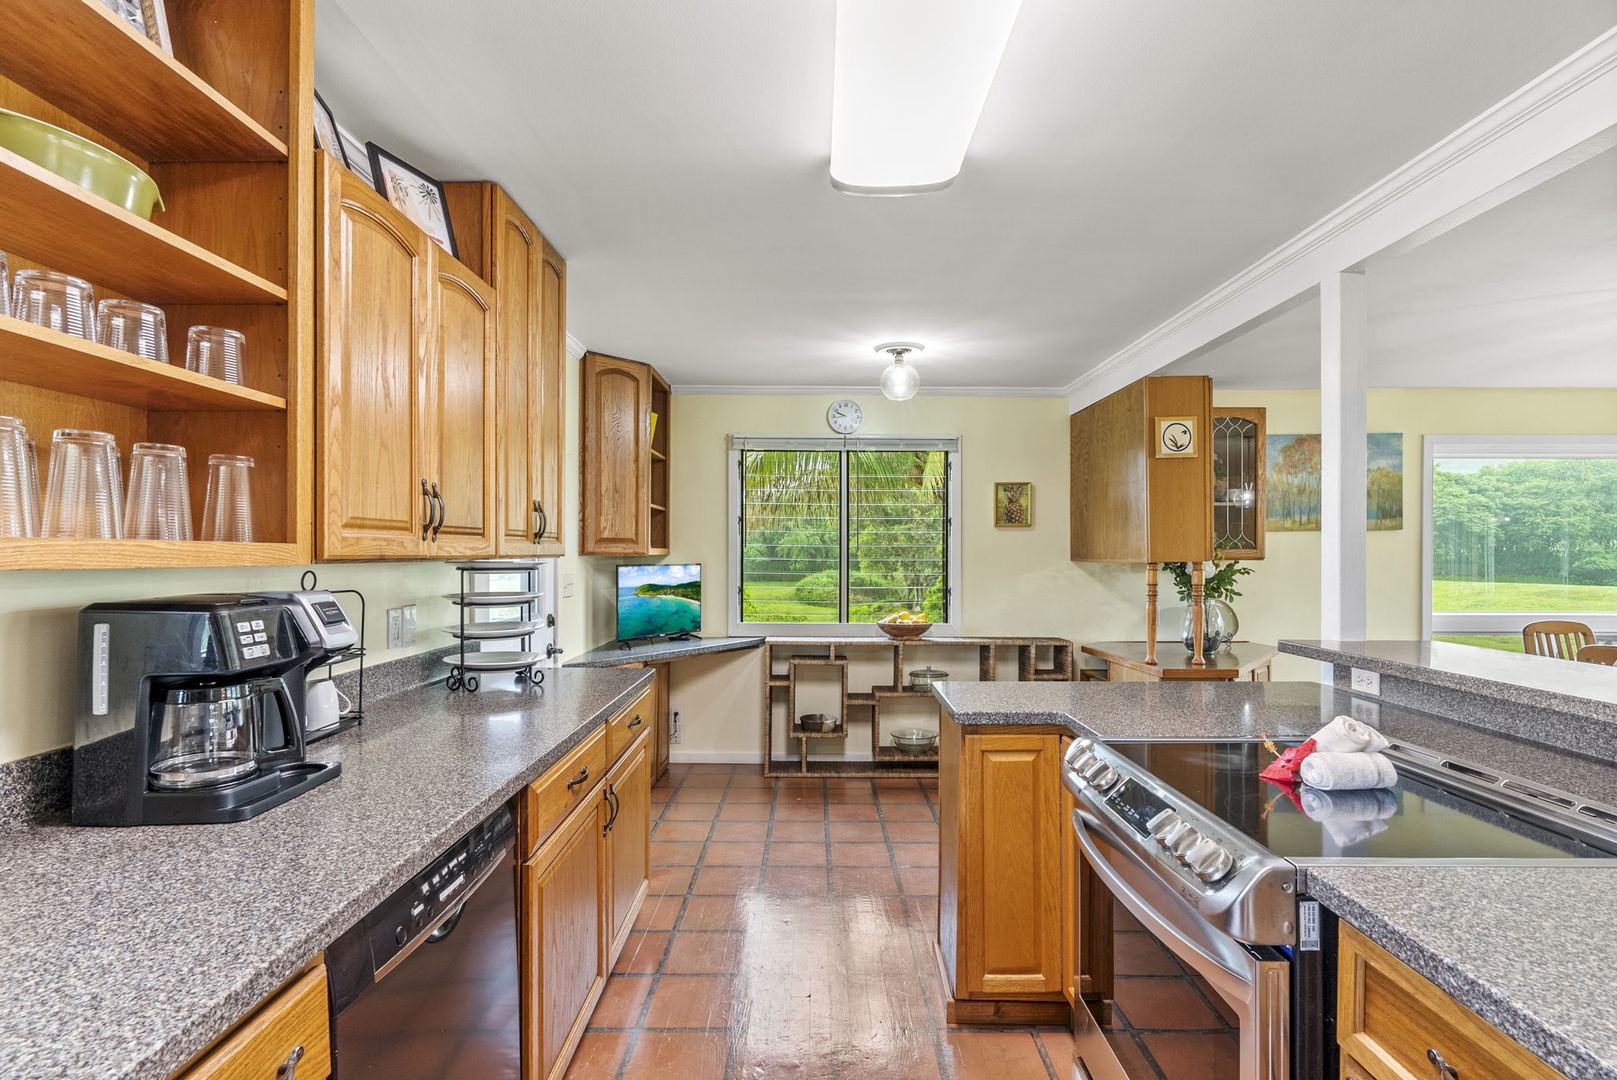 Hauula Vacation Rentals, Mau Loa Hale - Large kitchen with plenty of counter space